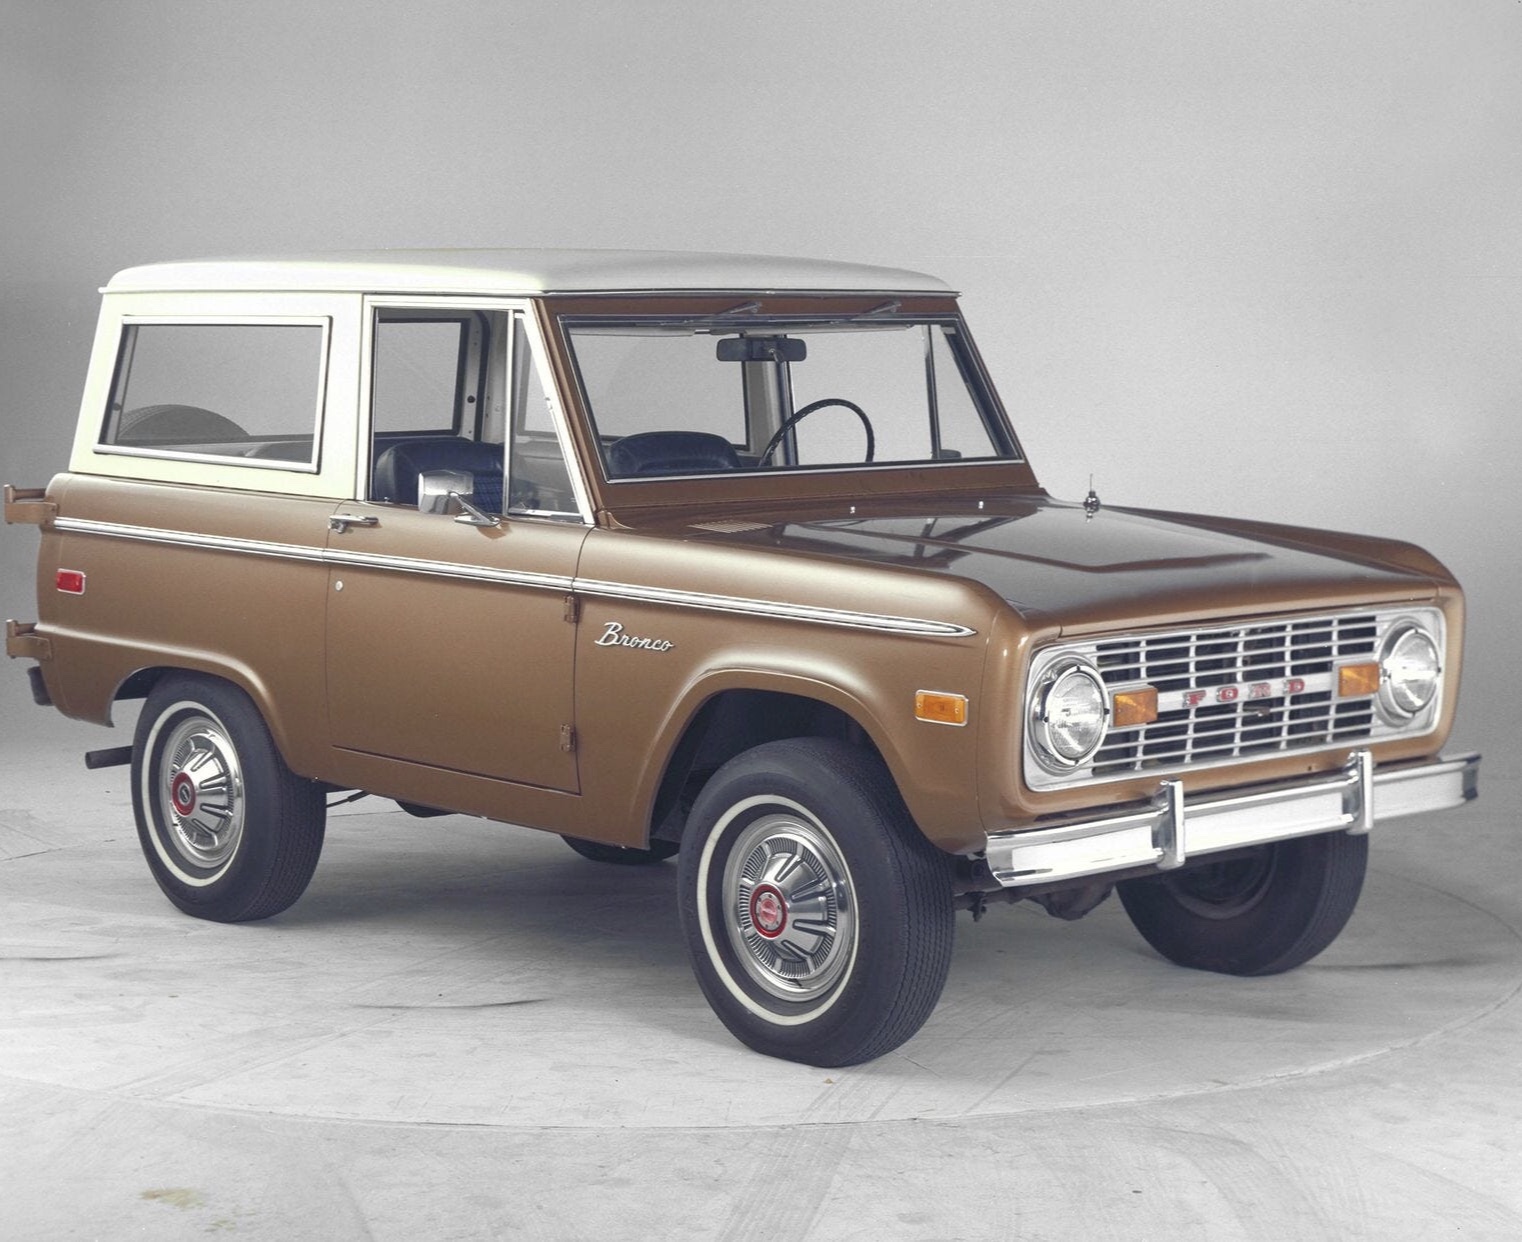 Ford Bronco What colors do you wish to see for the Bronco in the future? 9BED9118-CED4-4FD4-BF03-21B5C1BEE07D